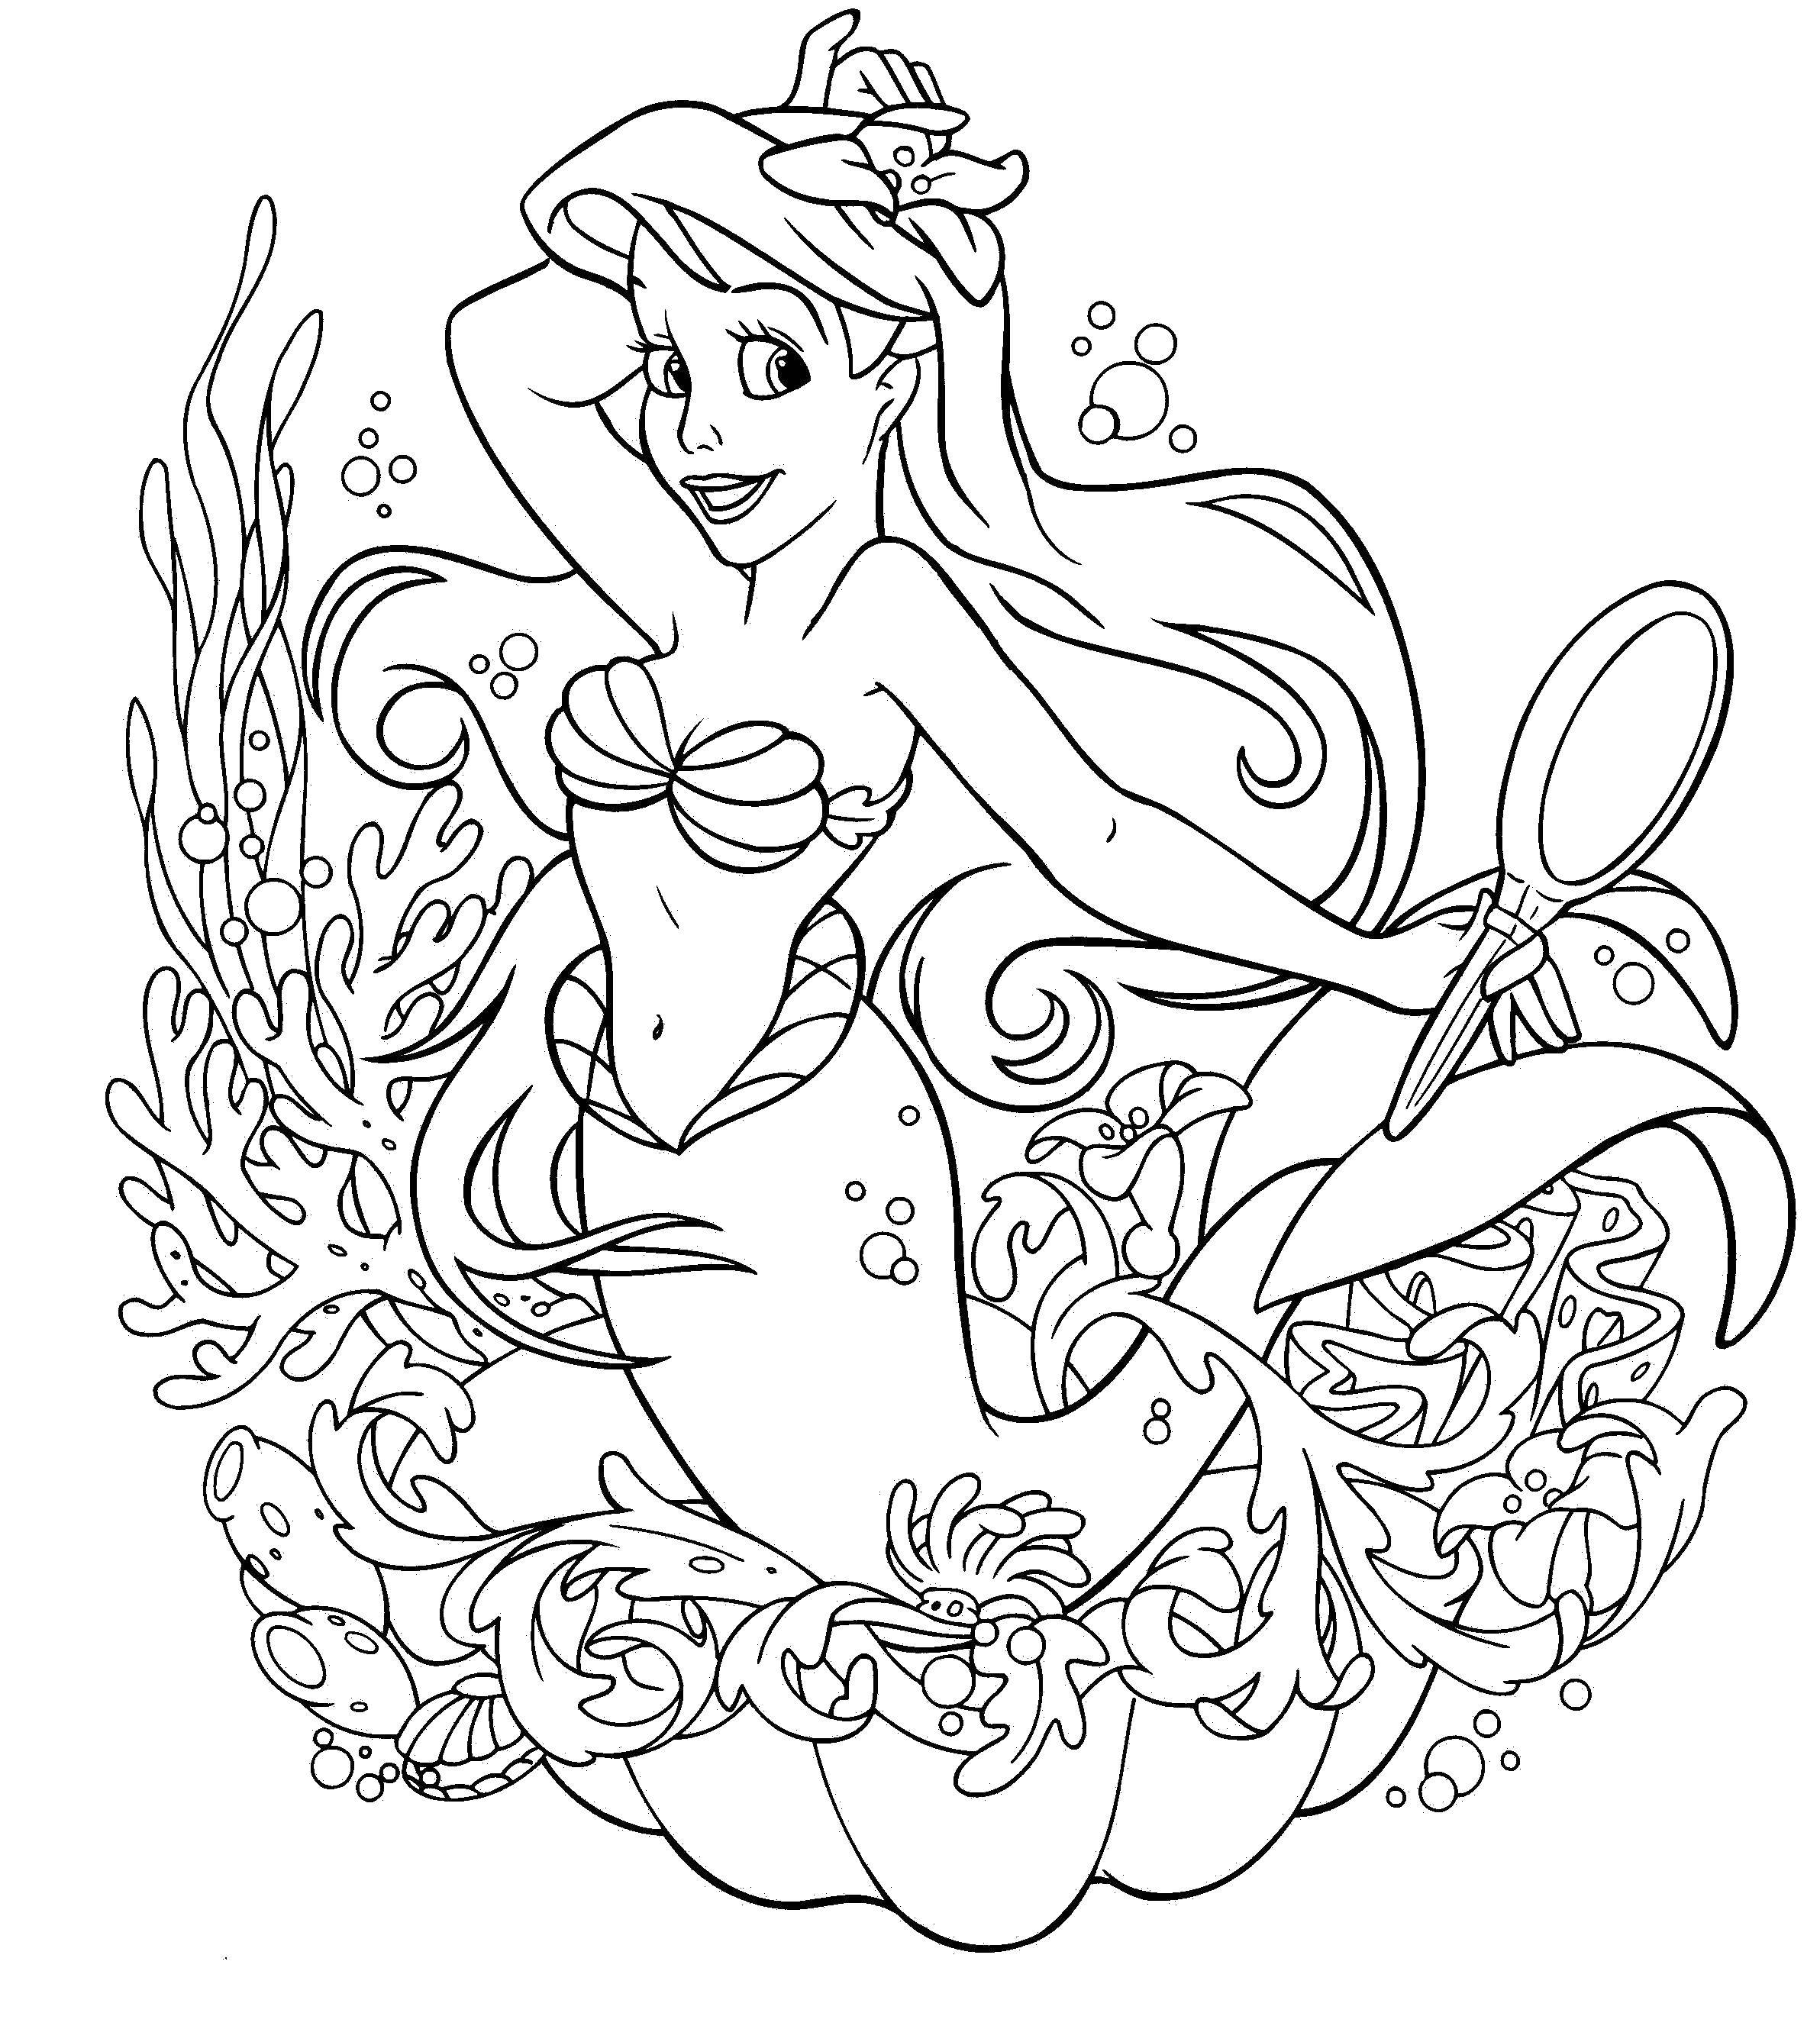 Coloring Ariel with mirror. Category Coloring pages for kids. Tags:  Ariel, mermaid.